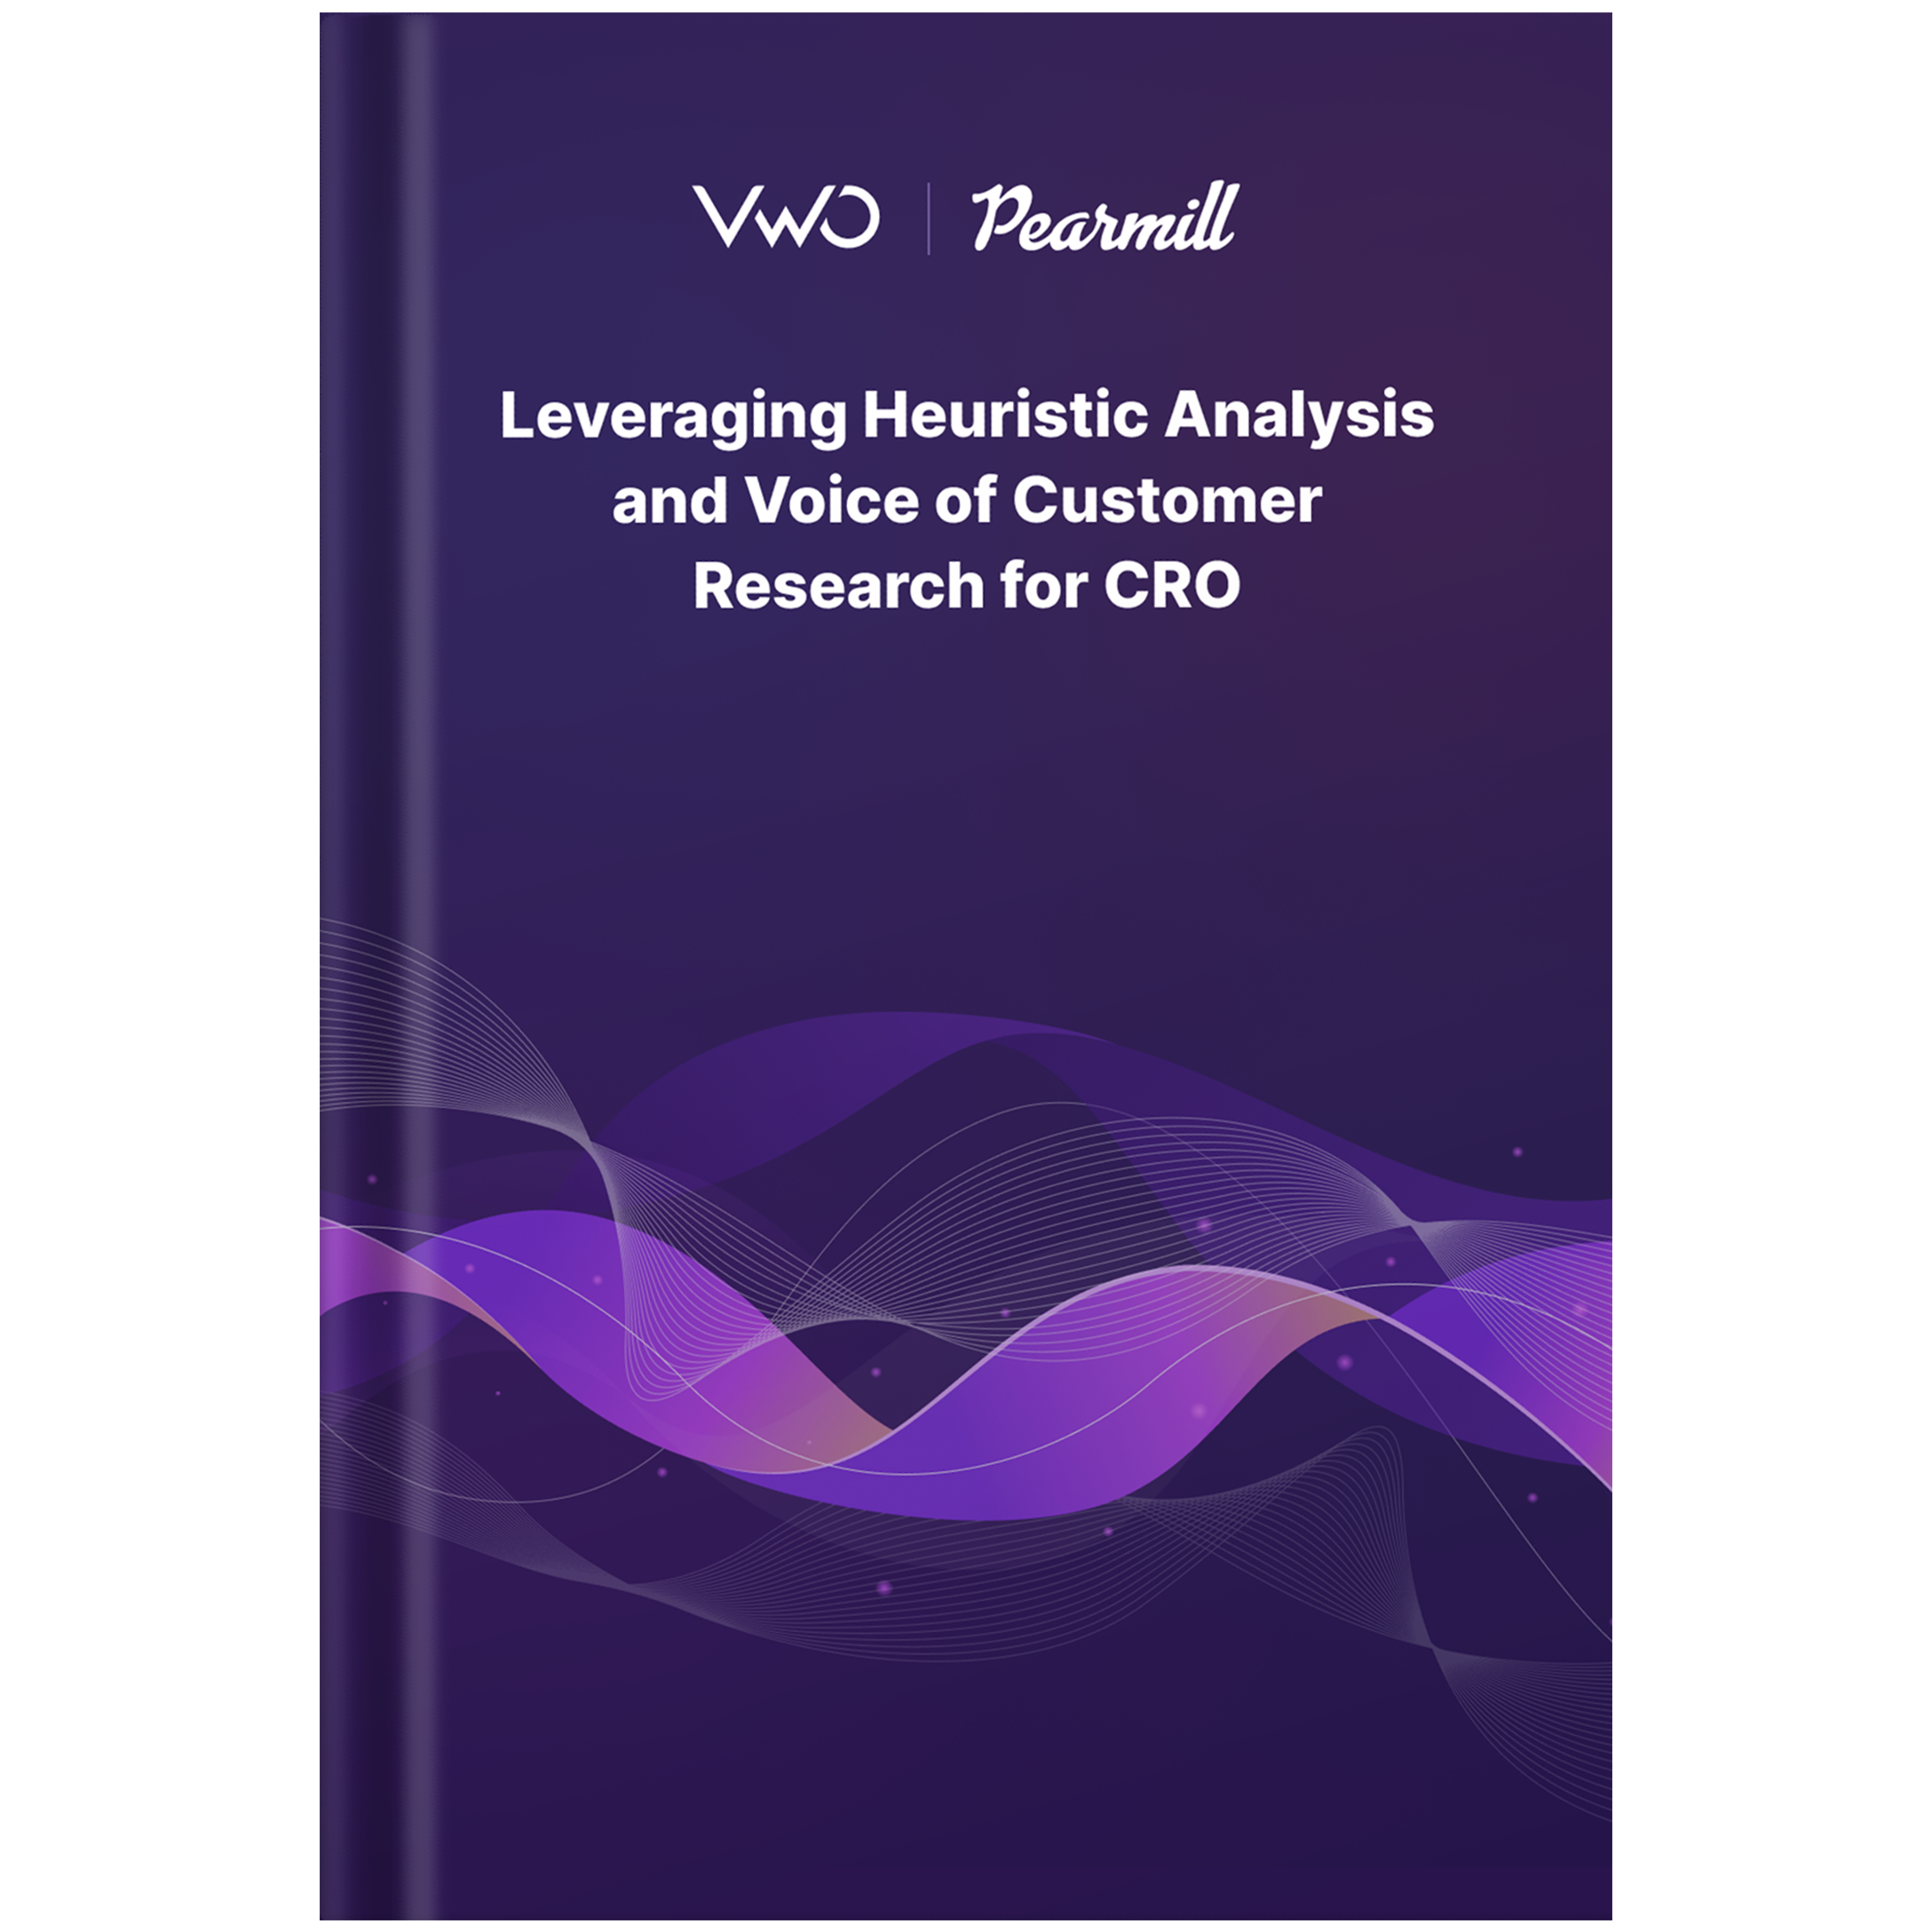 Leveraging Heuristic Analysis & Voice of Customer Research for CRO